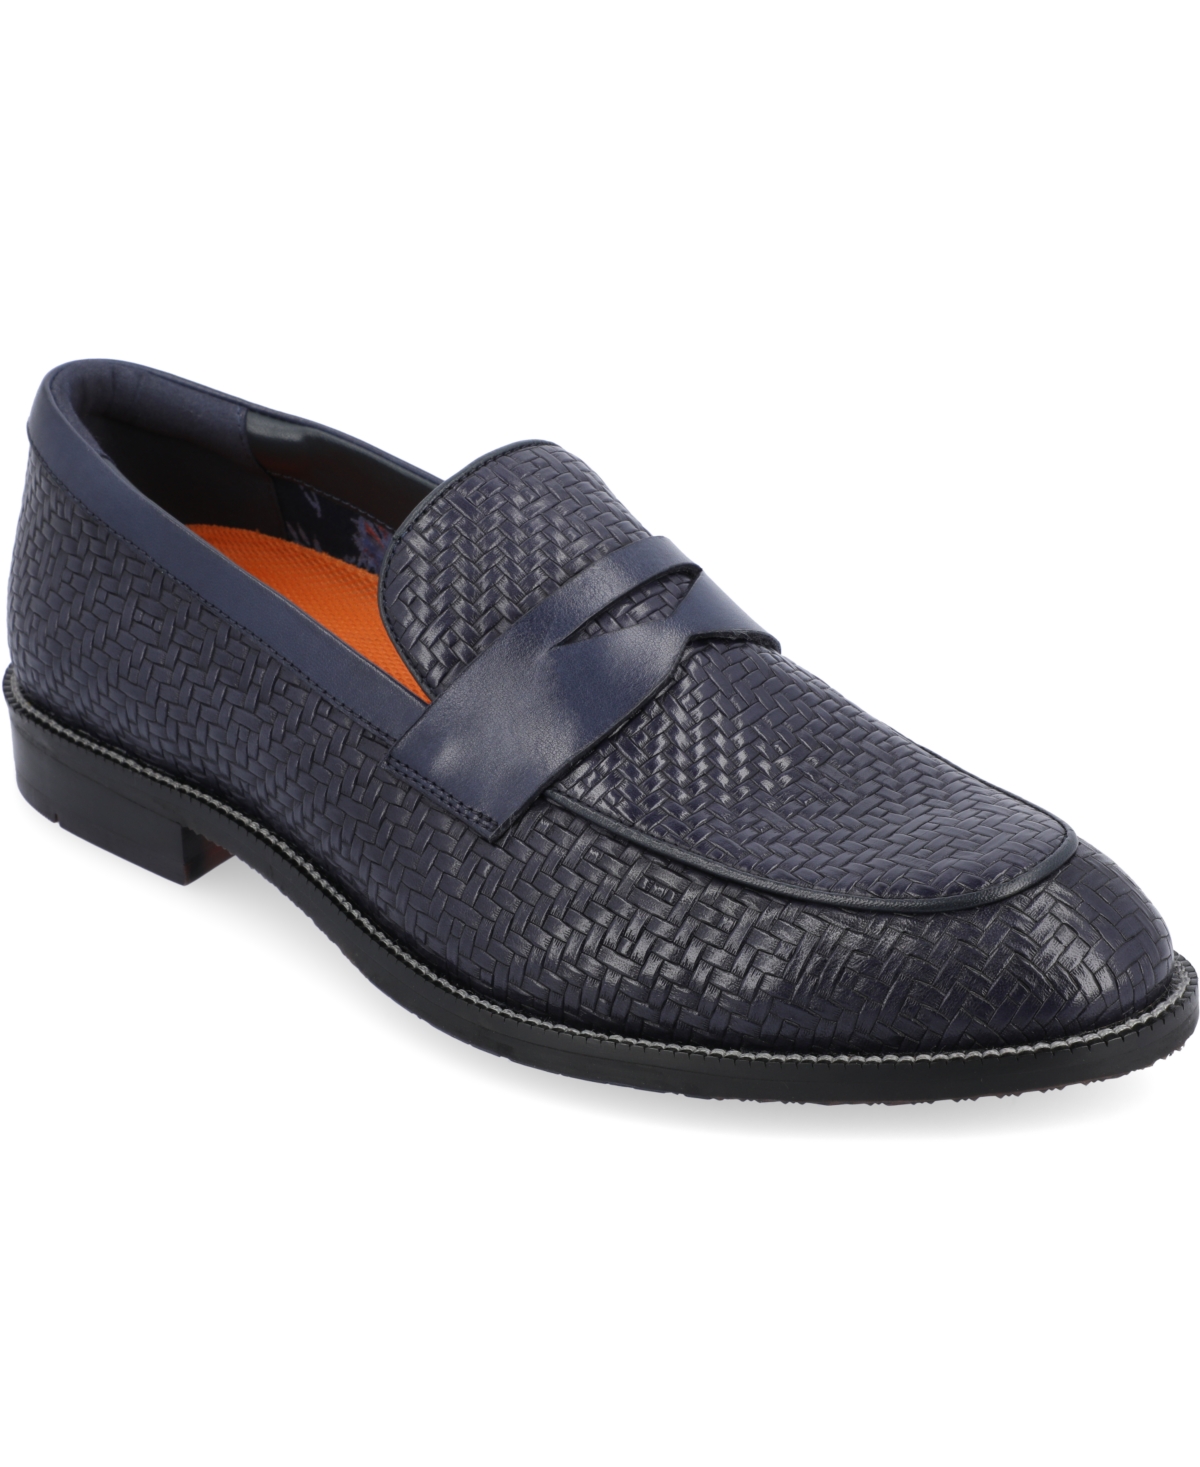 Men's Barlow Apron Toe Penny Loafers Dress Shoes - Navy